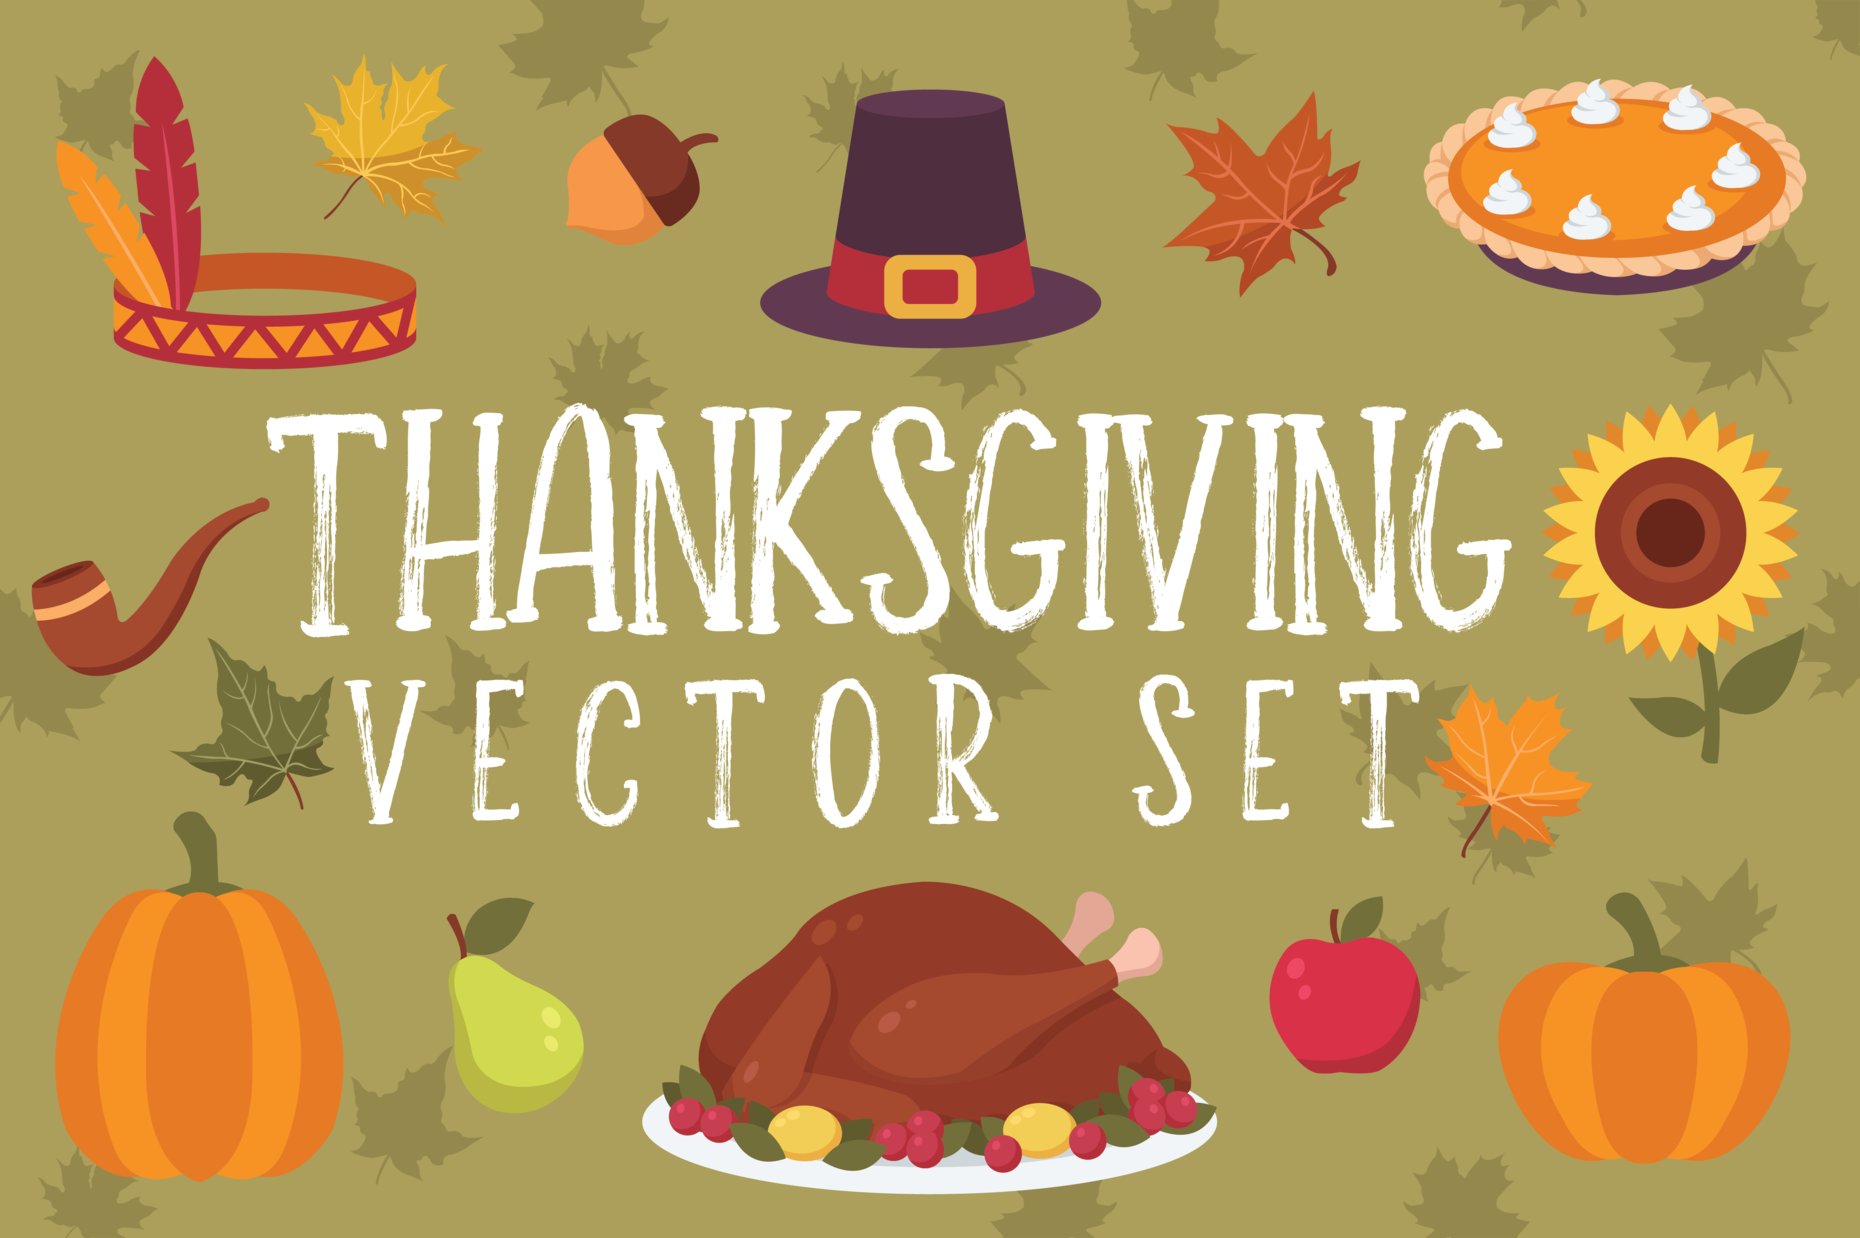 High quality Thanksgiving graphics for you.